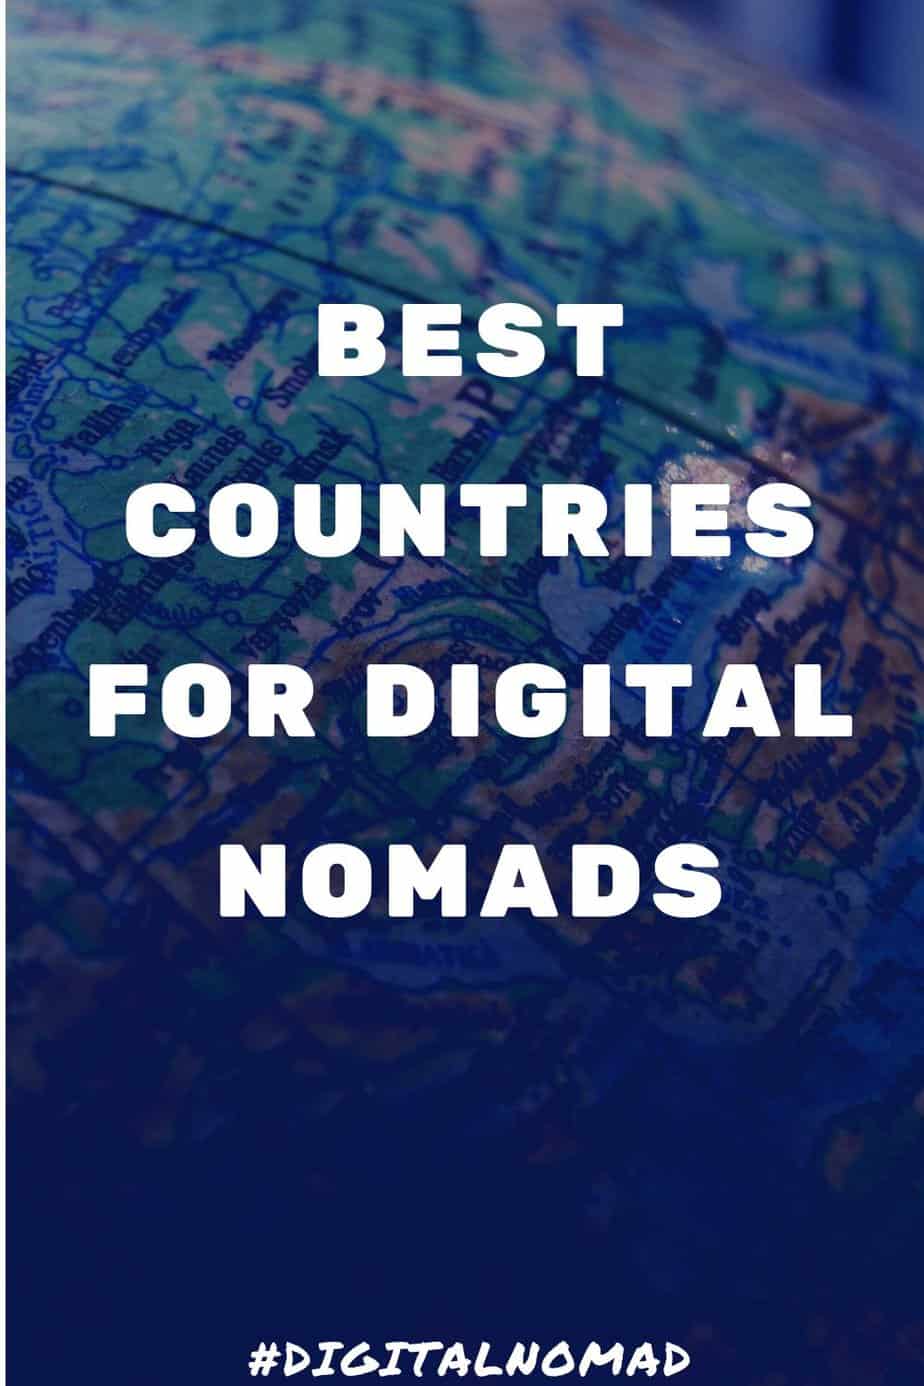 Best countries for digital nomads in 2022